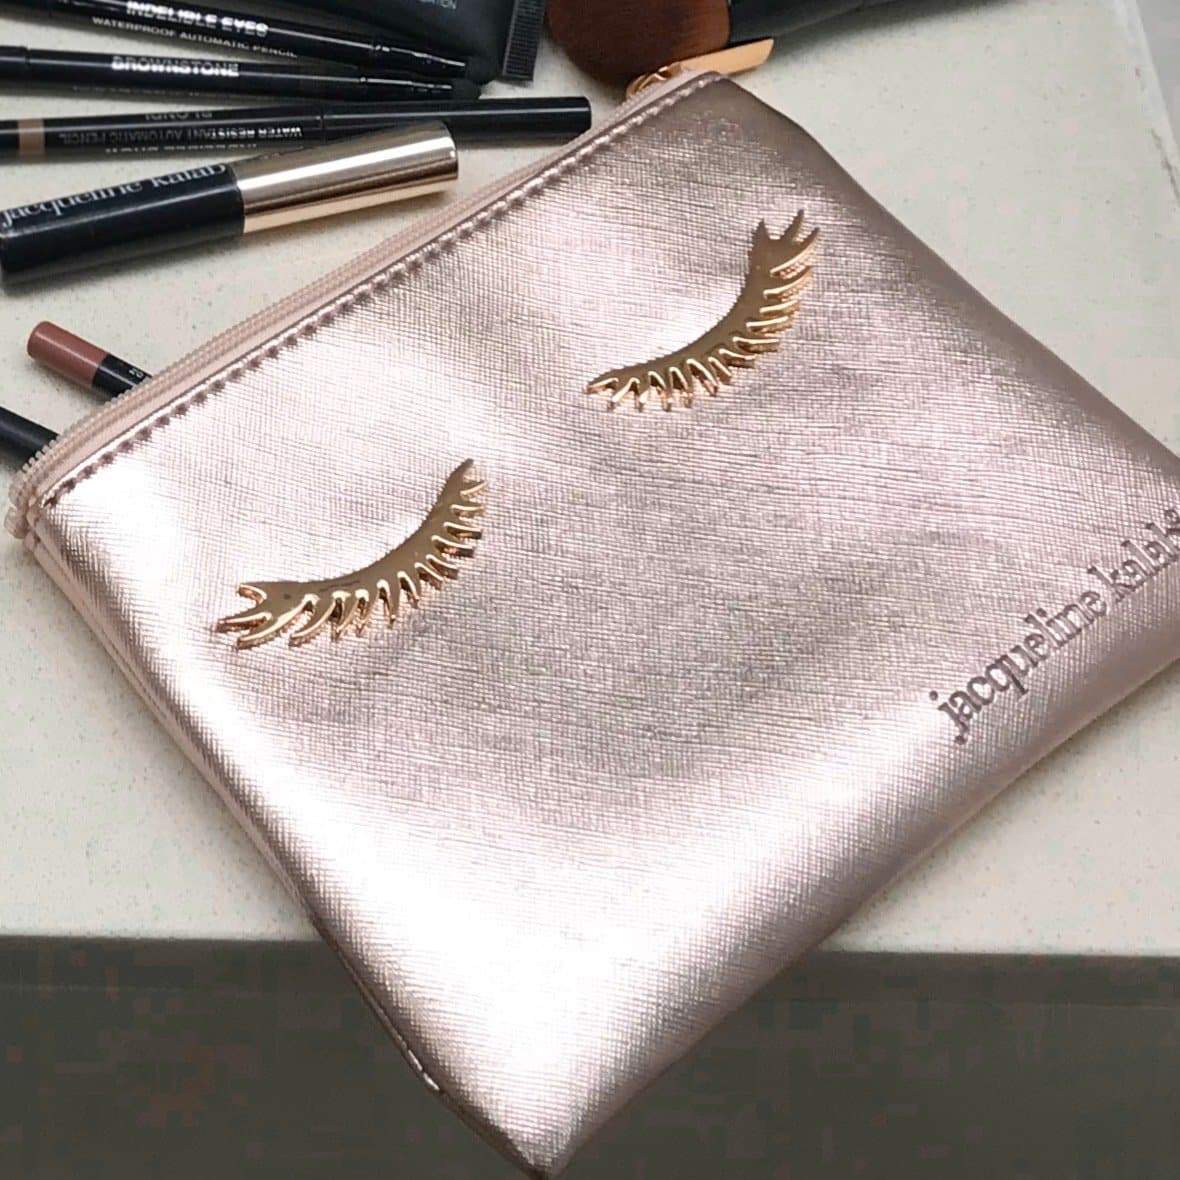 The Ultimate Makeup Bag - MyMakeup.Store by Jacqueline Kalab